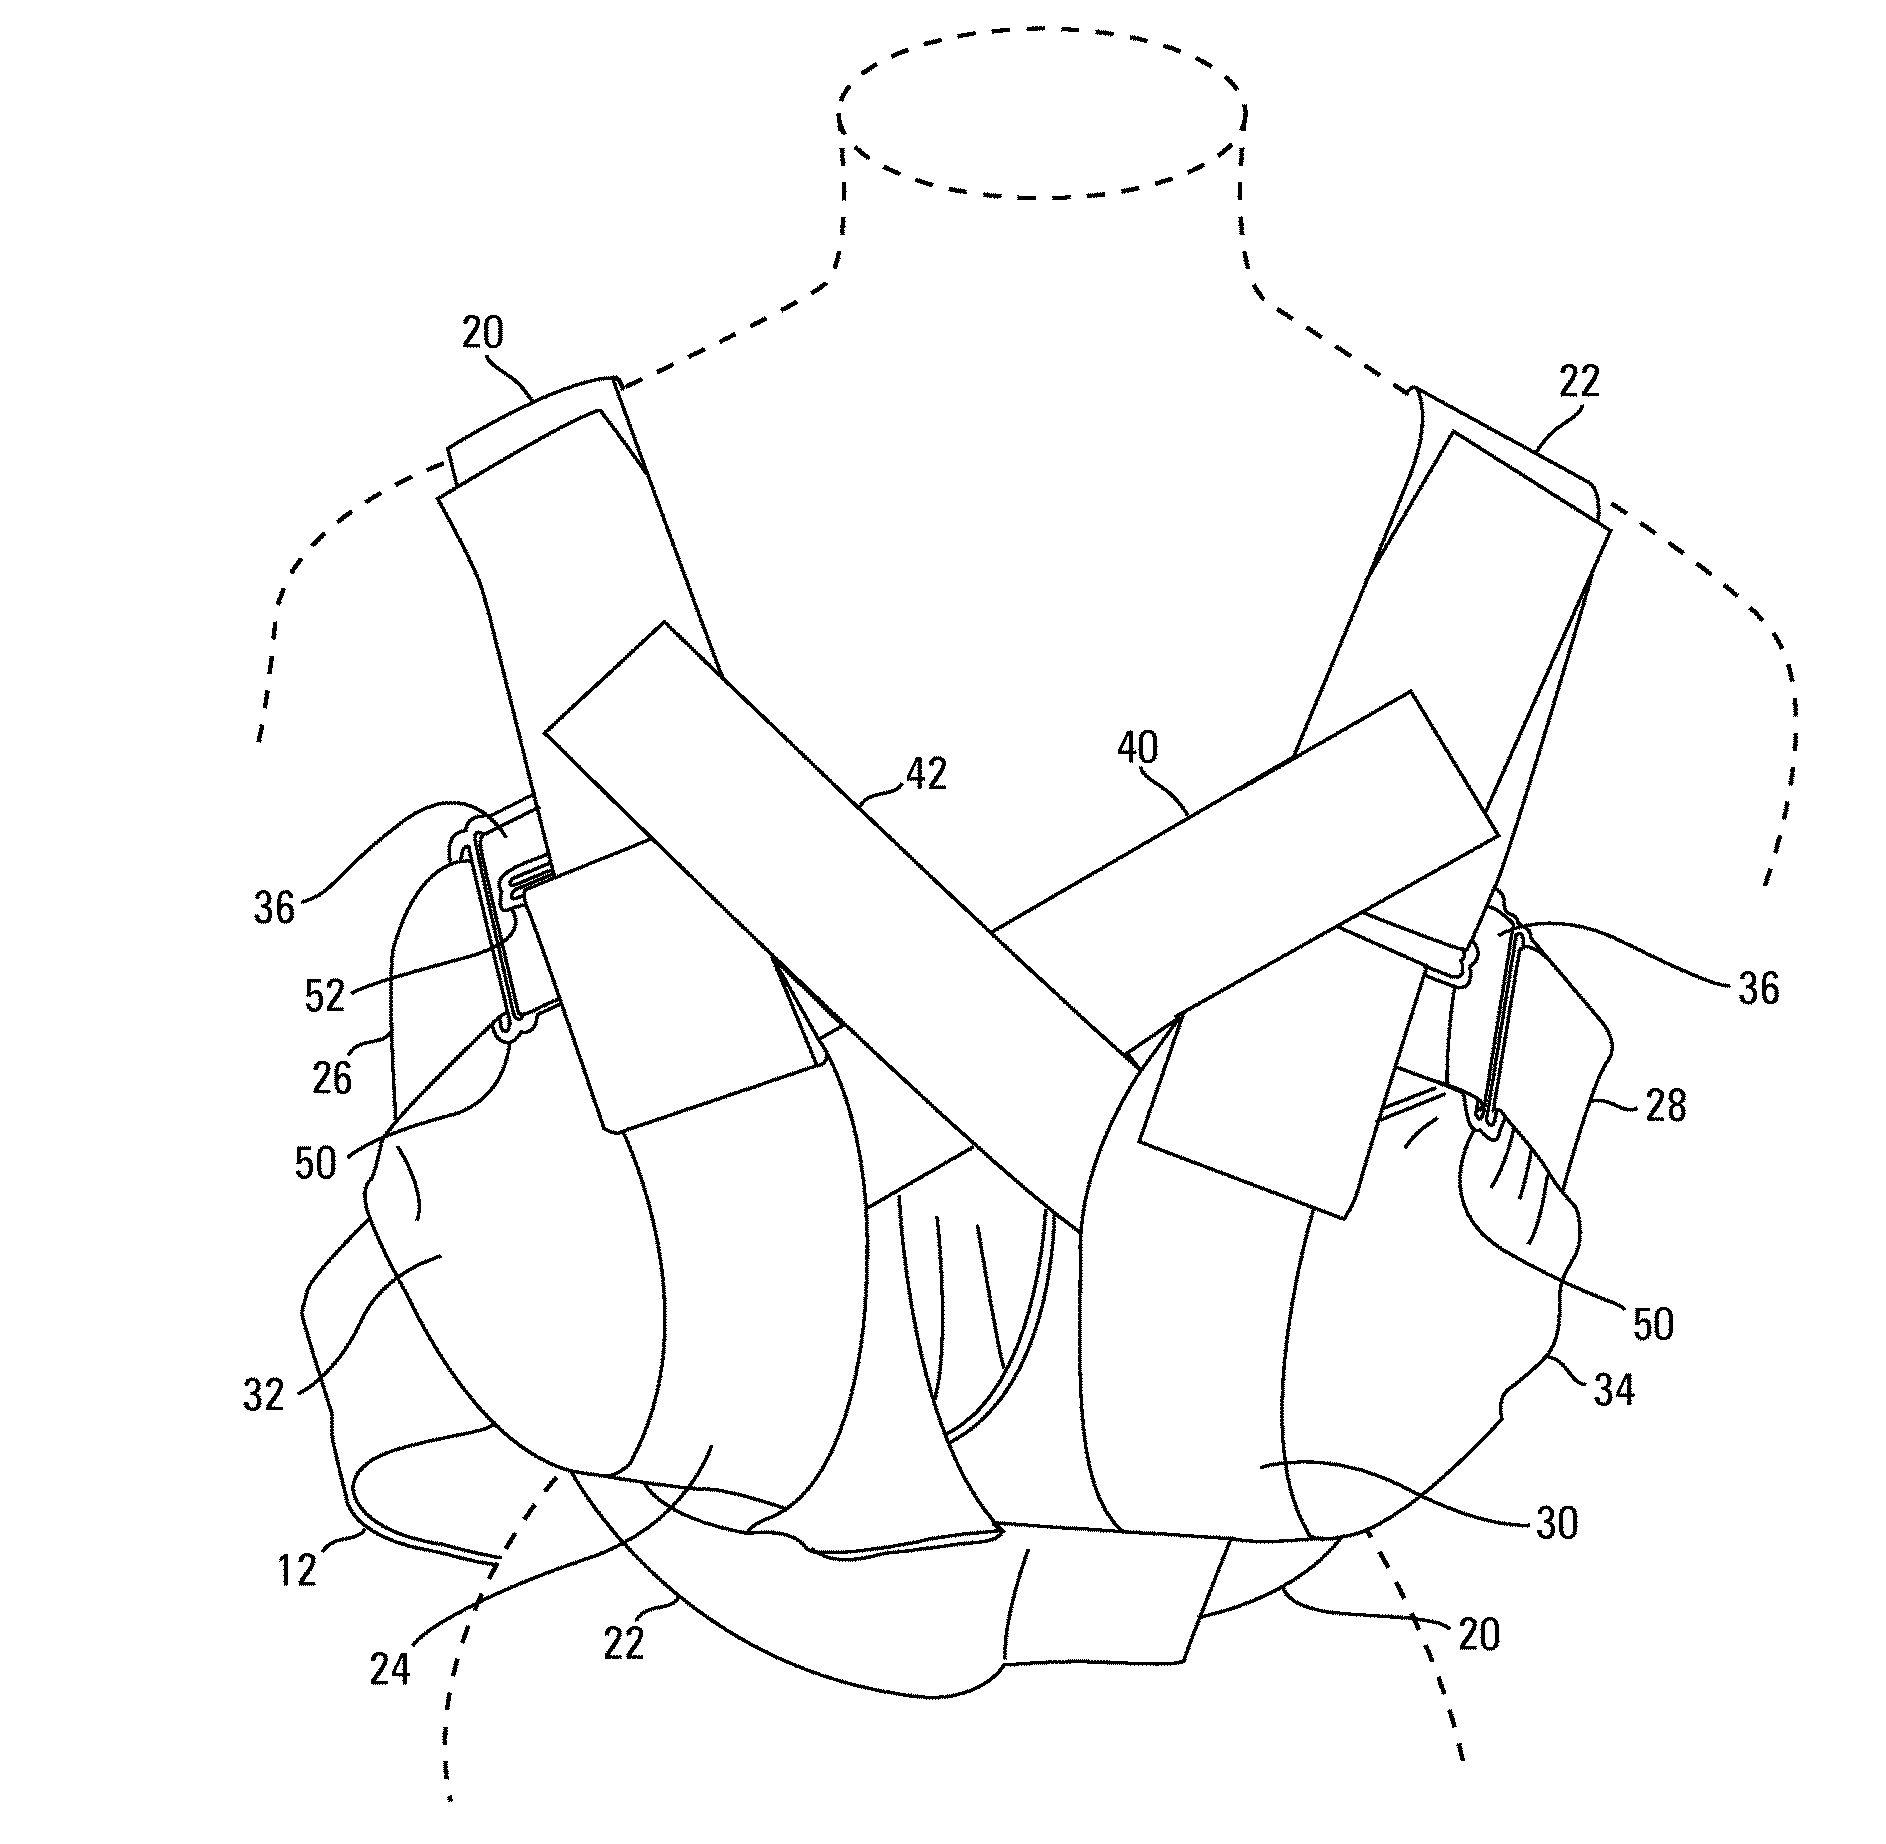 Post-operative sternum and breast device